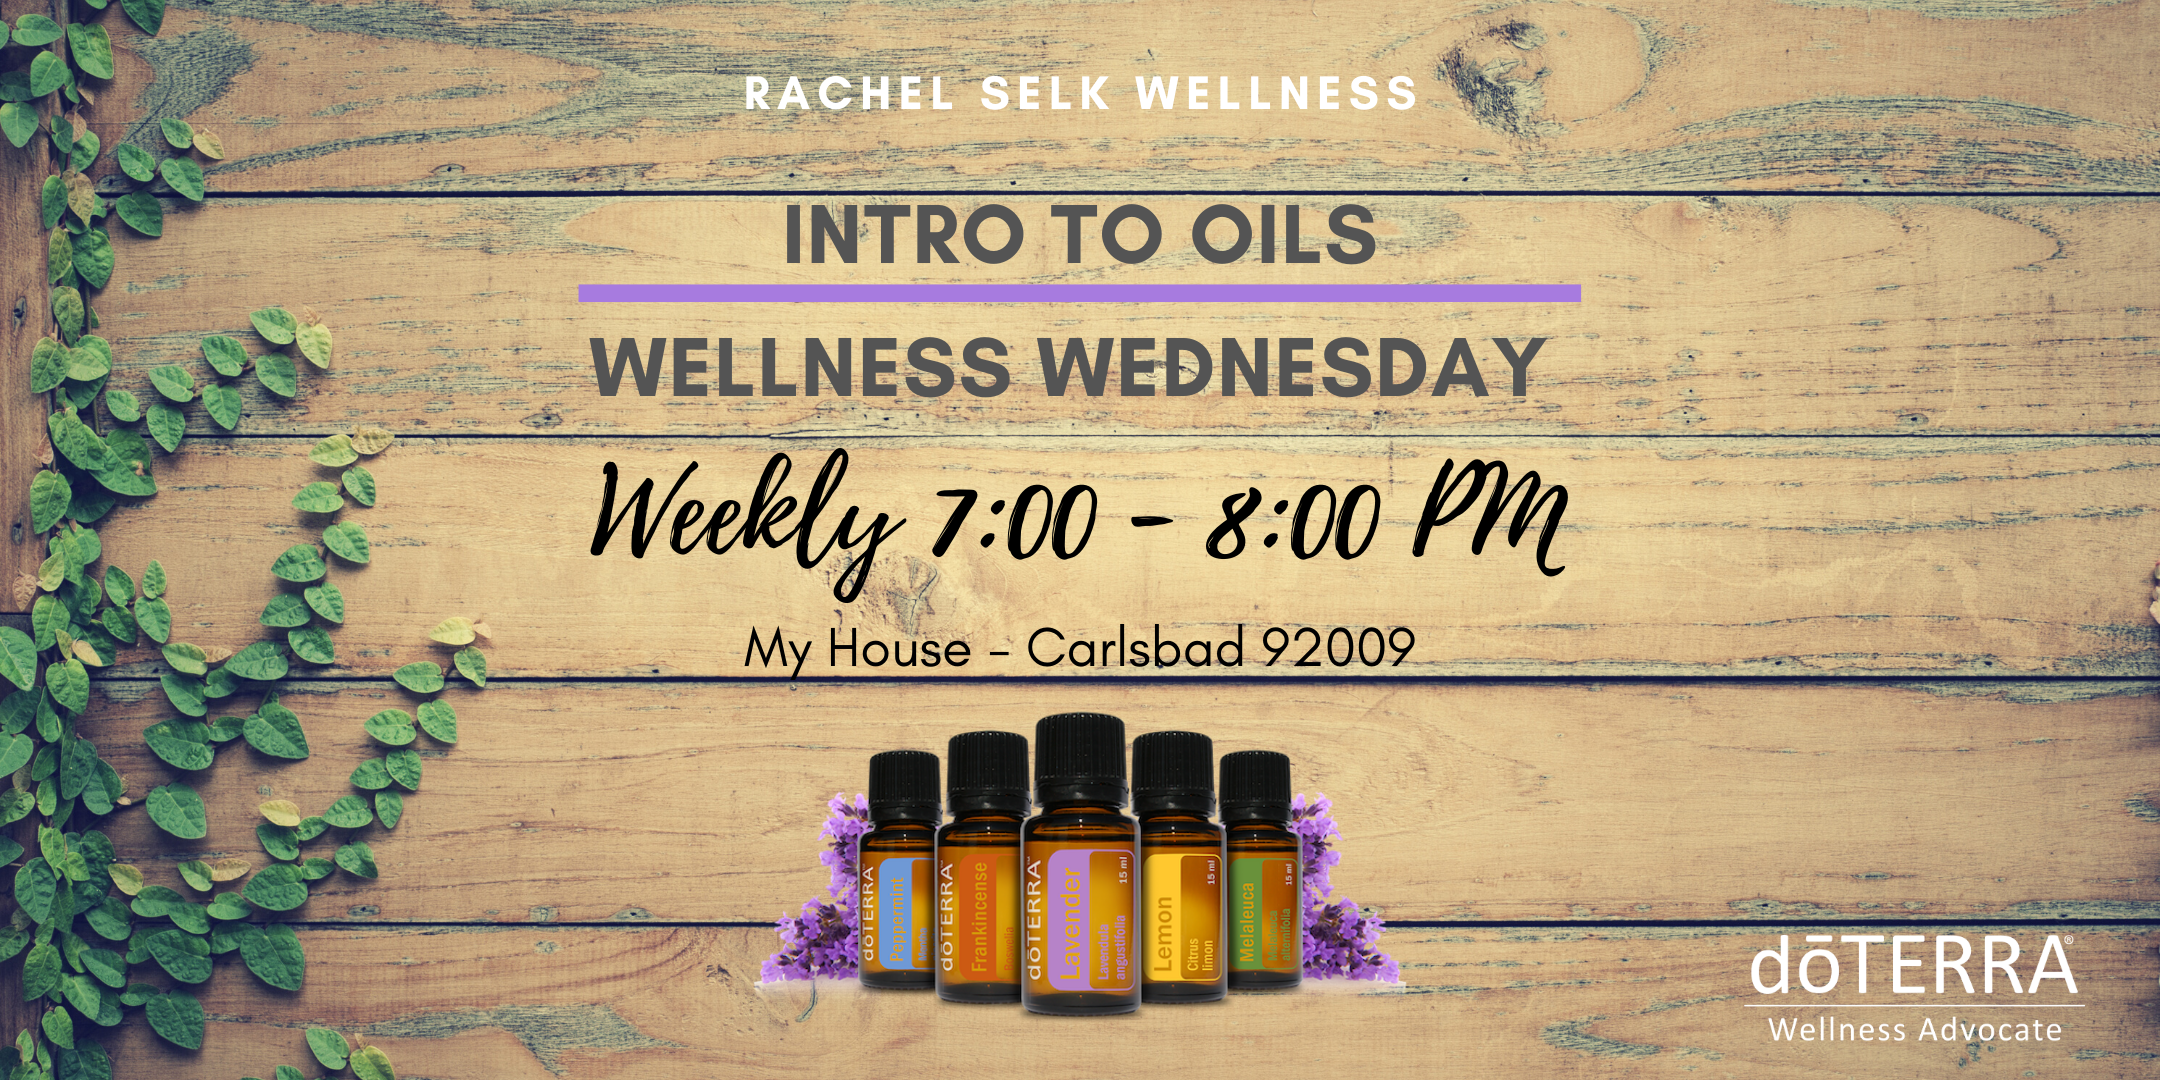 POSTPONED DURING COVID 19 - Wellness Wednesday - Intro to Oils